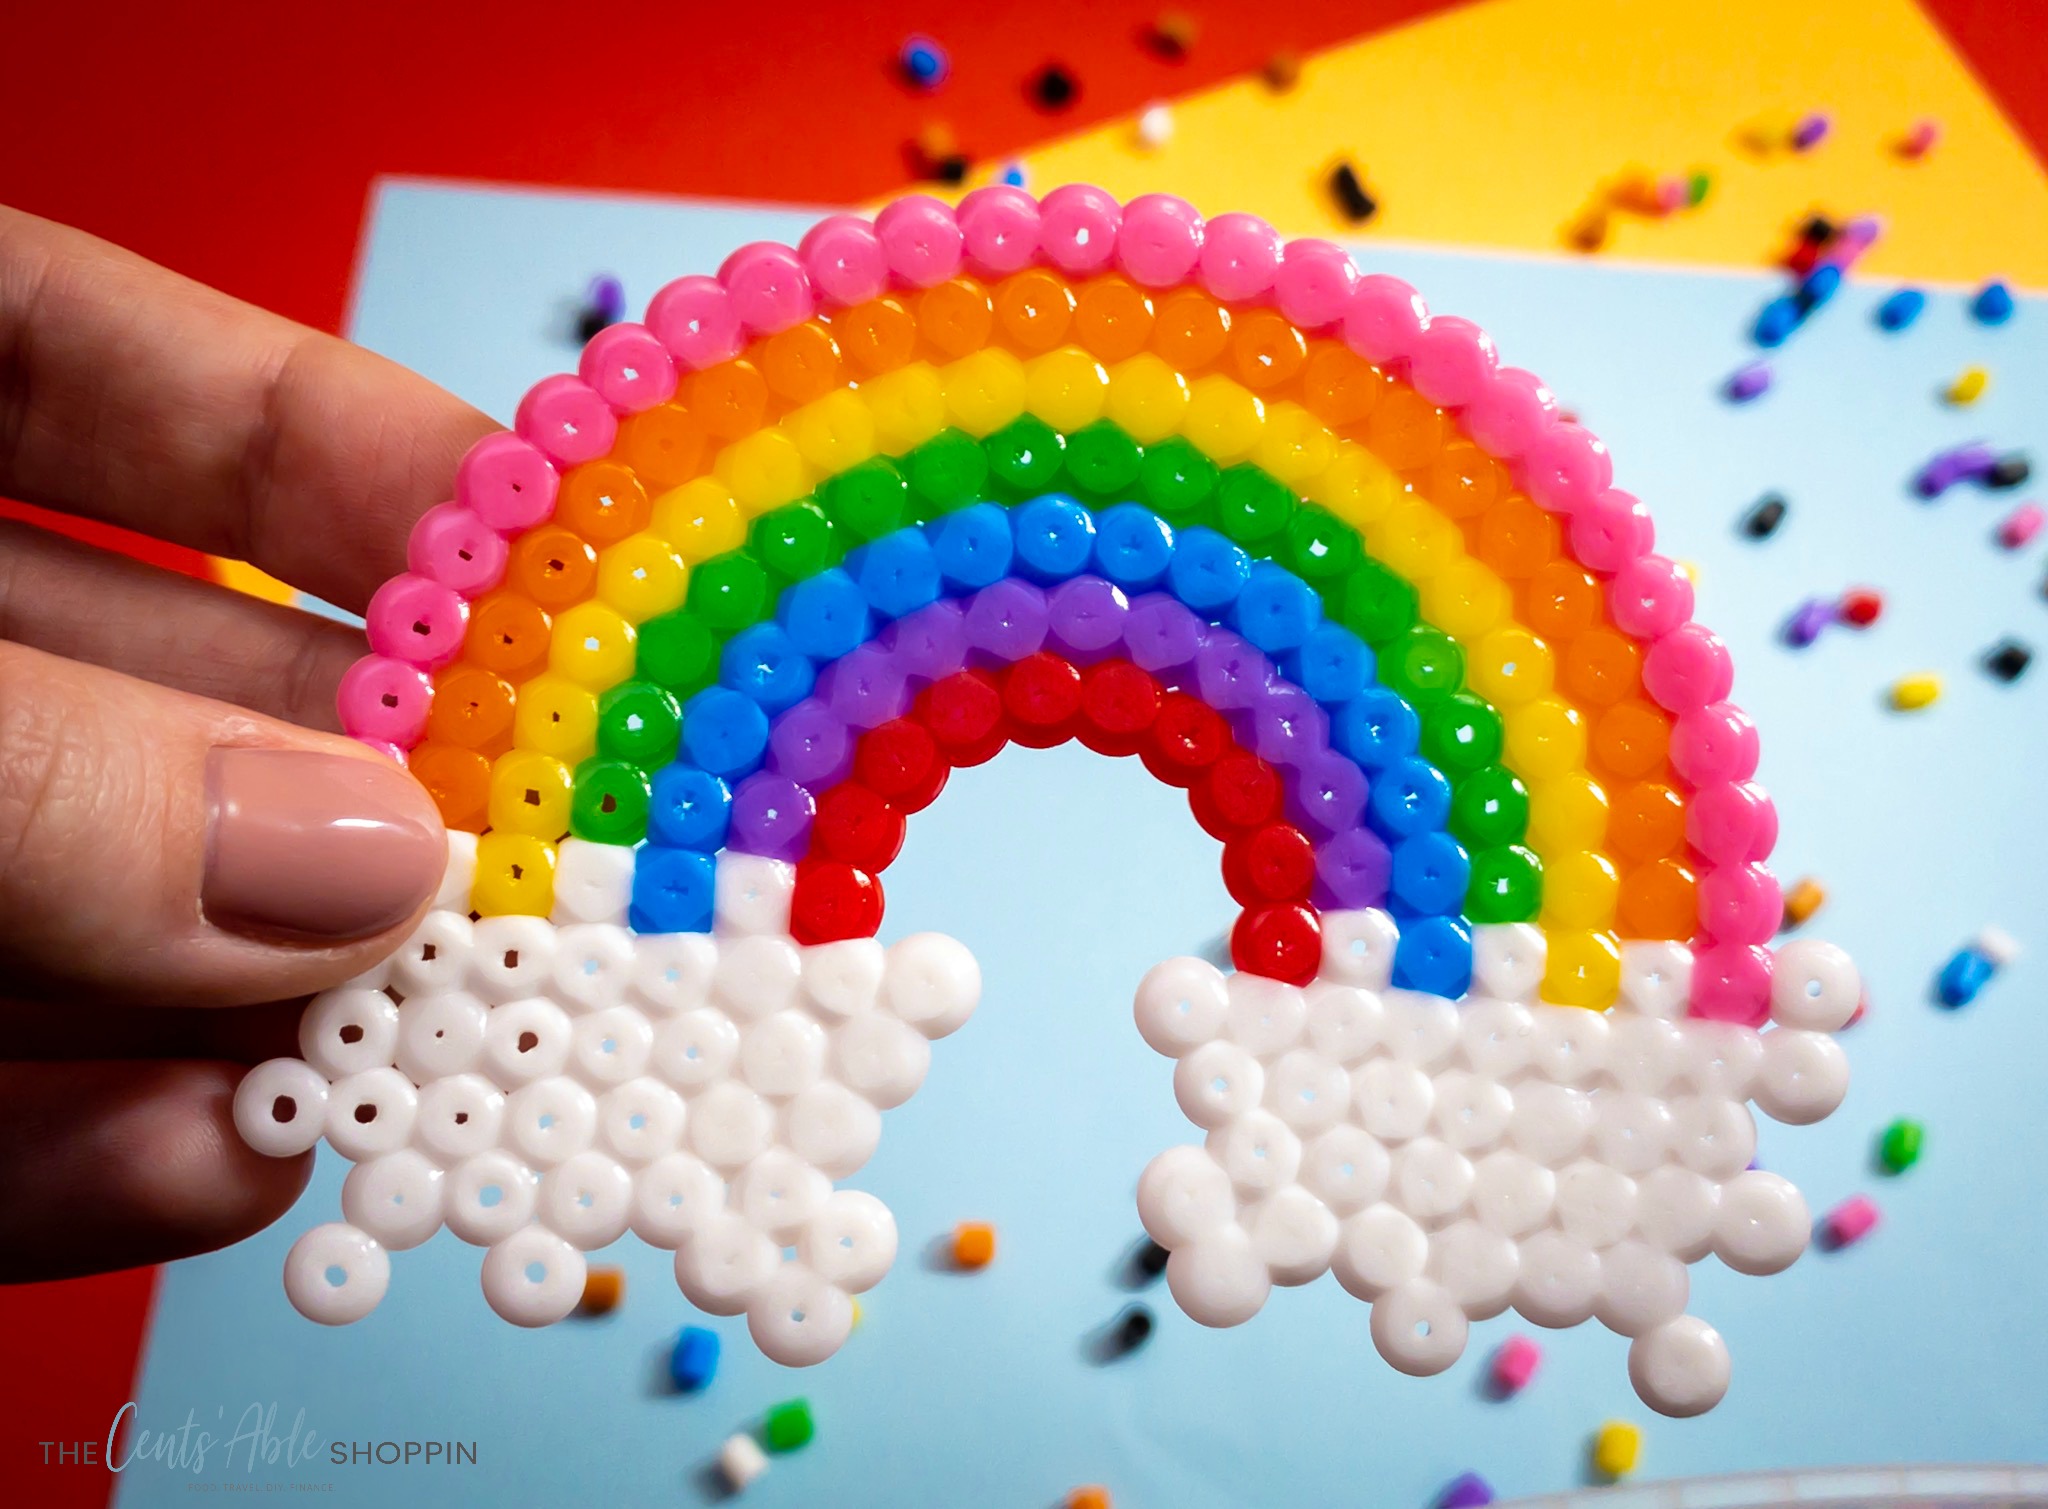 This perler bead rainbow will help kids develop fine motor skills, patience and artistic design while making a cute craft that's fun and colorful!